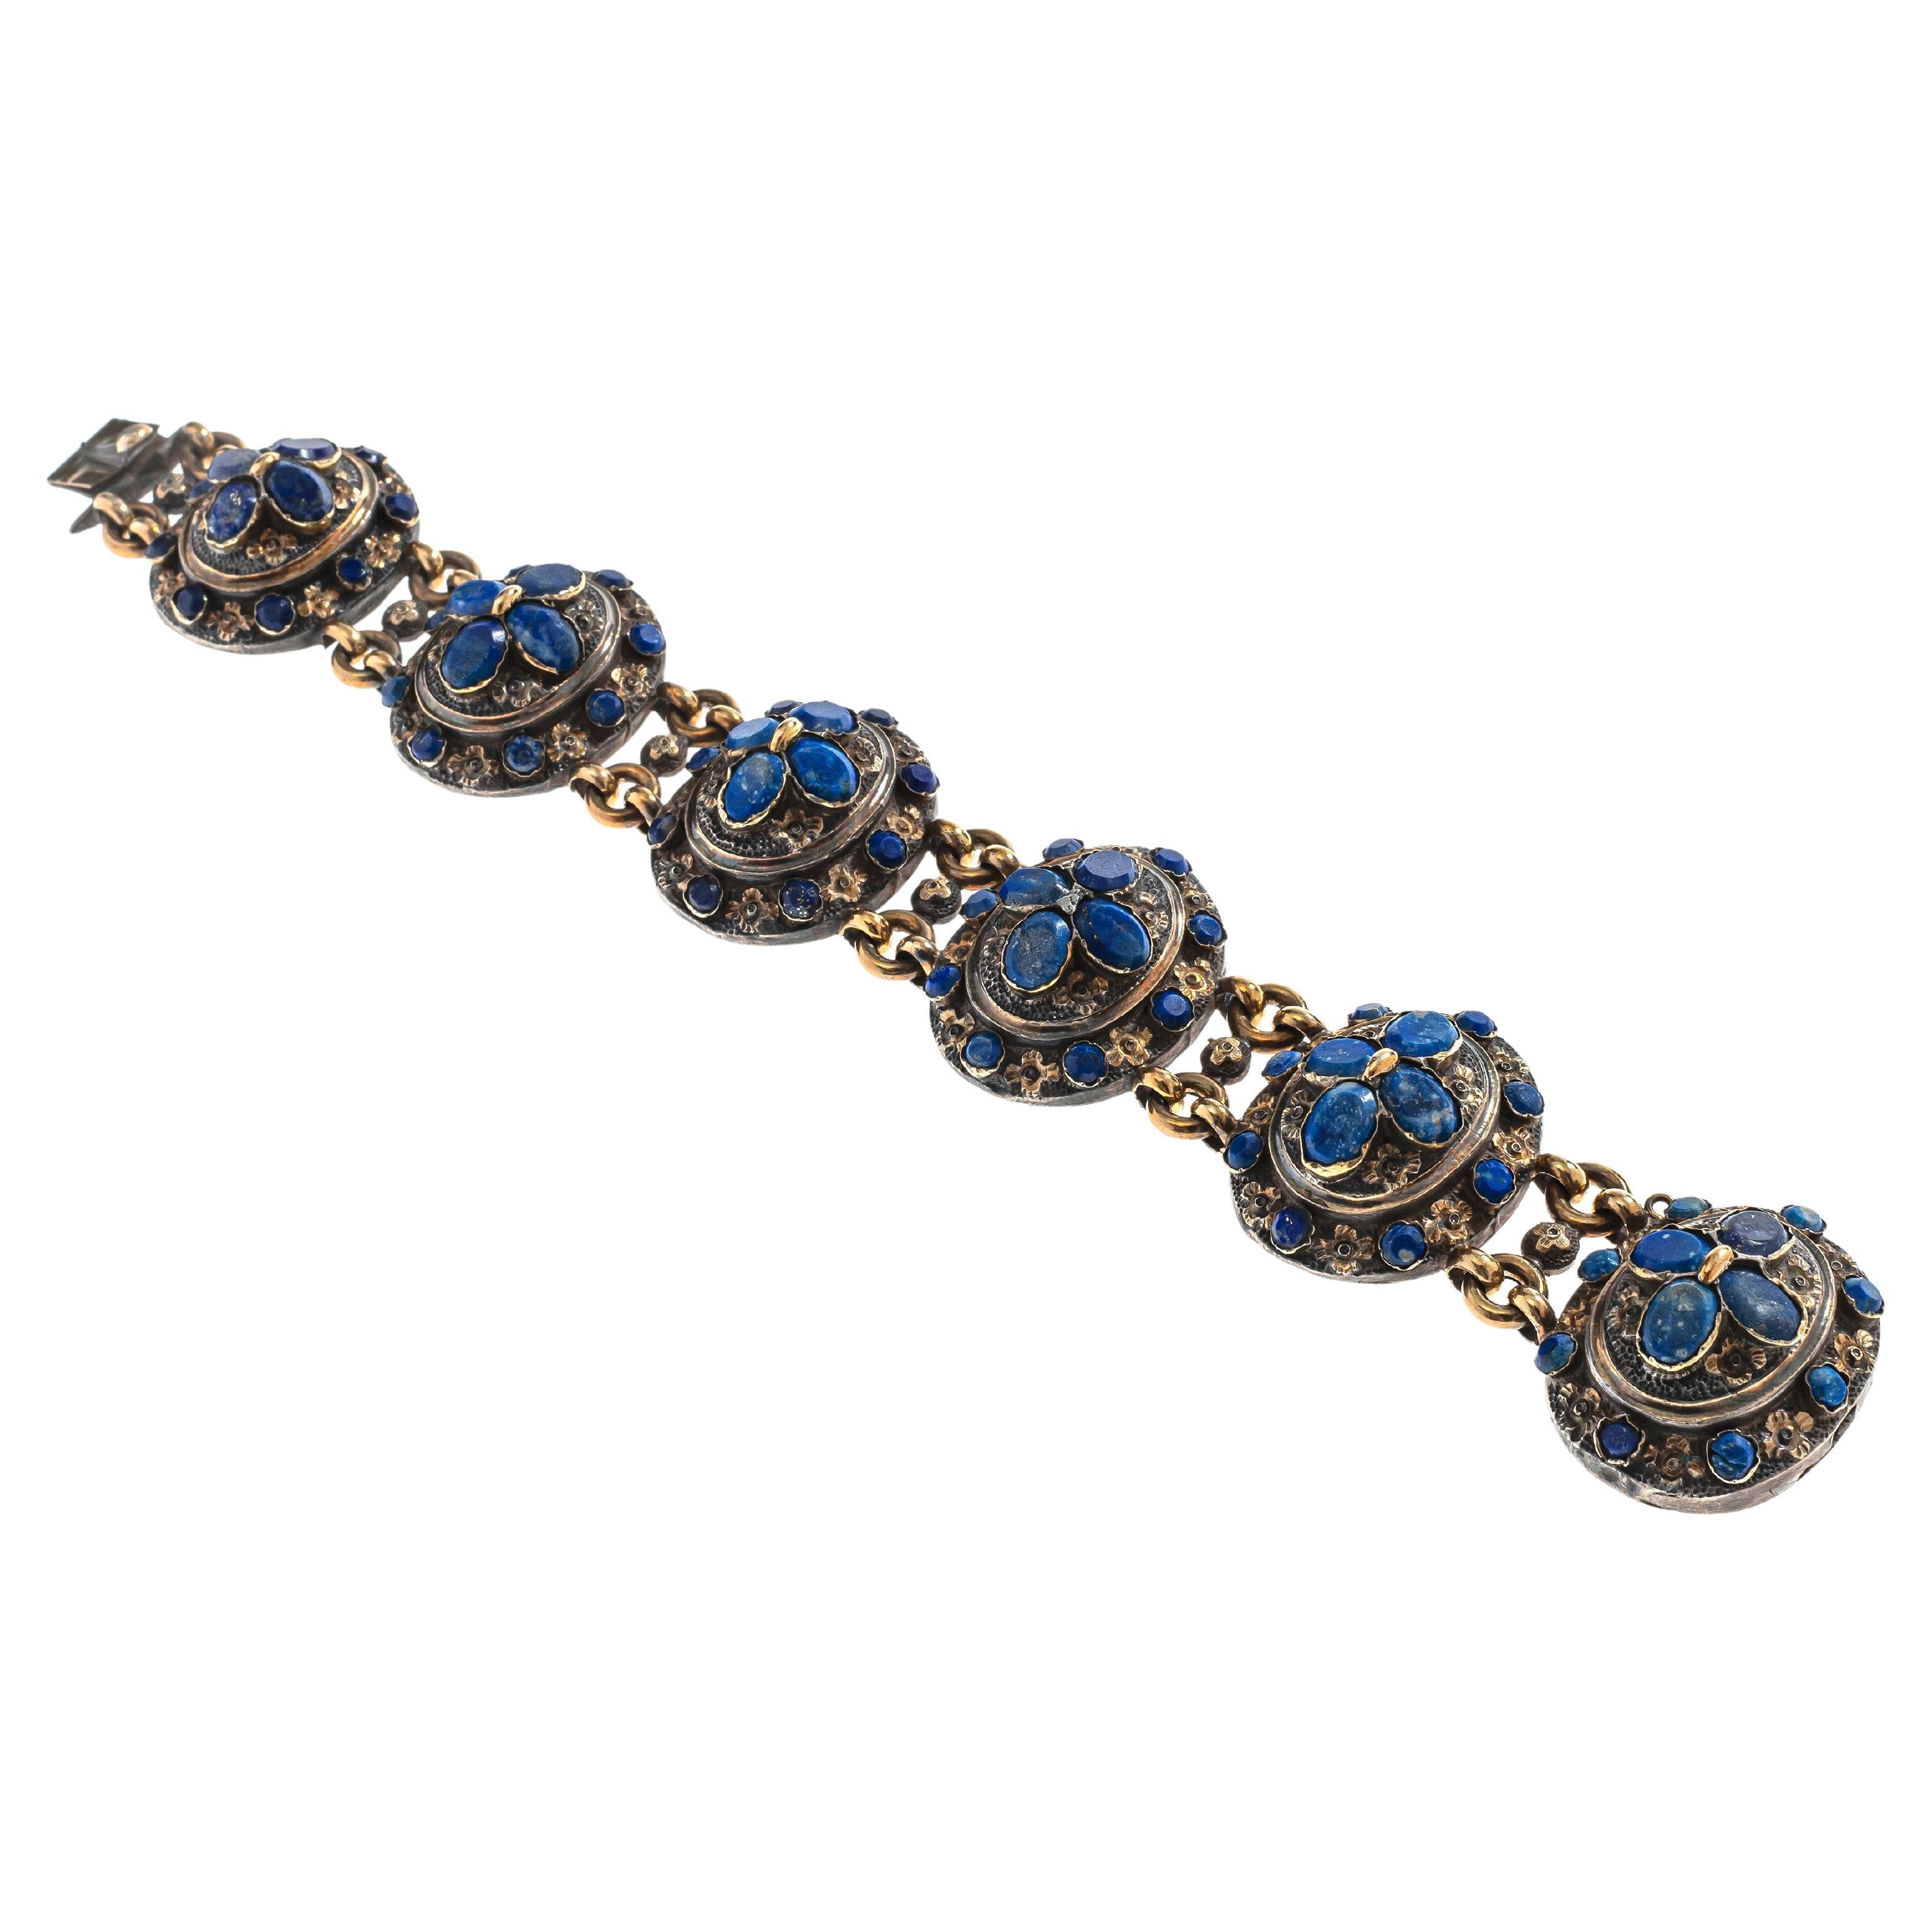 This important silver gilt bracelet is executed in Neo Gothic taste popular in France in the 1840's. The bracelet is designed as six articulated oval elements in high relief. Each element features an inner oval with a  flower made up from four oval